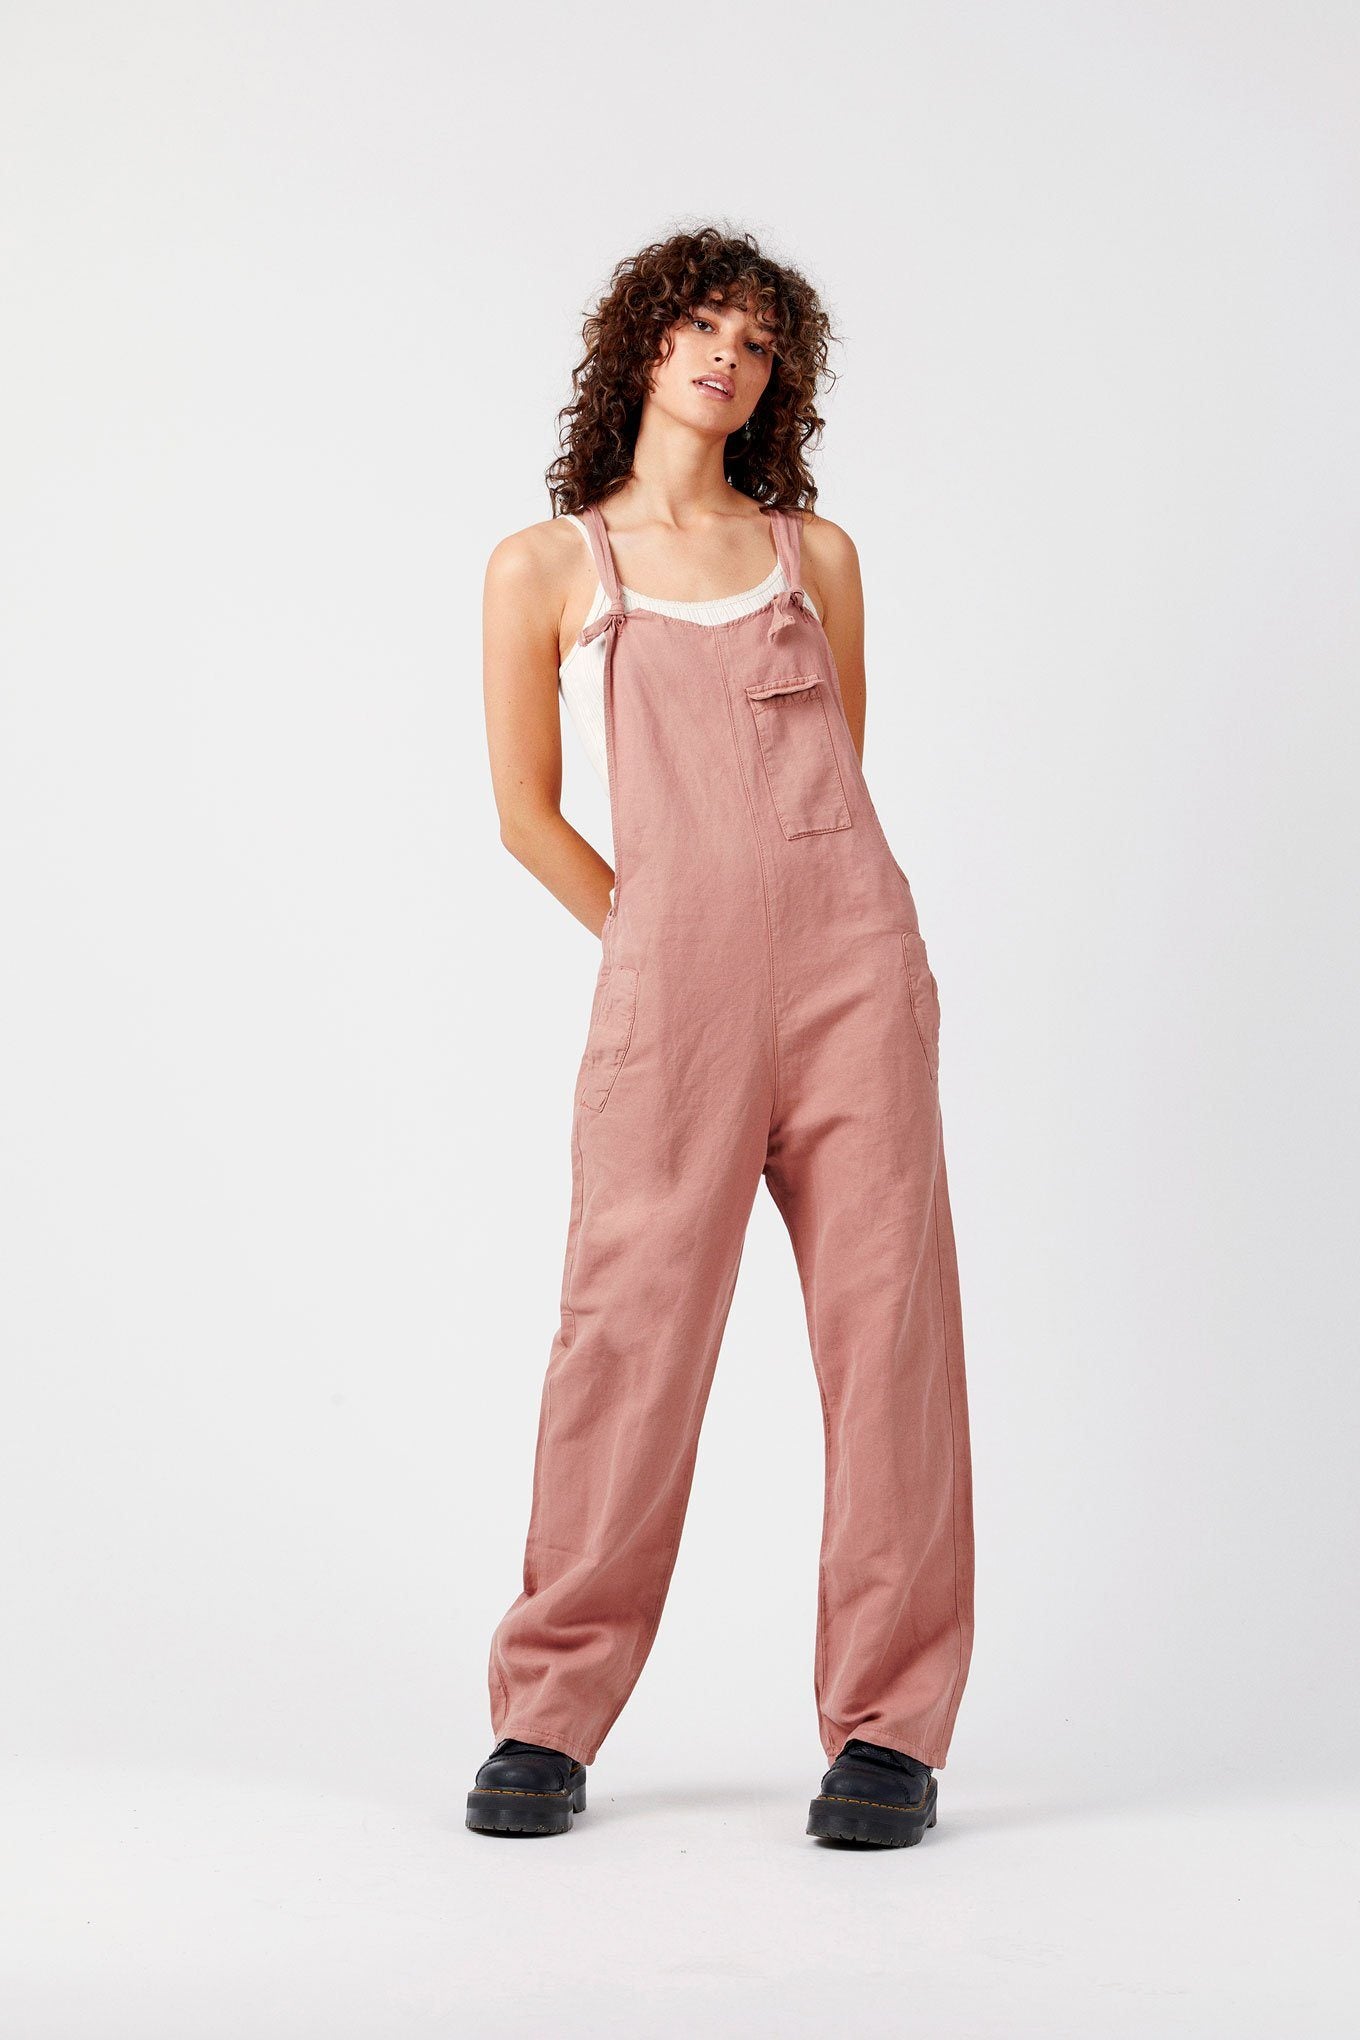 Dungarees - MARY-LOU Pink - Organic Cotton Dungarees By Flax & Loom